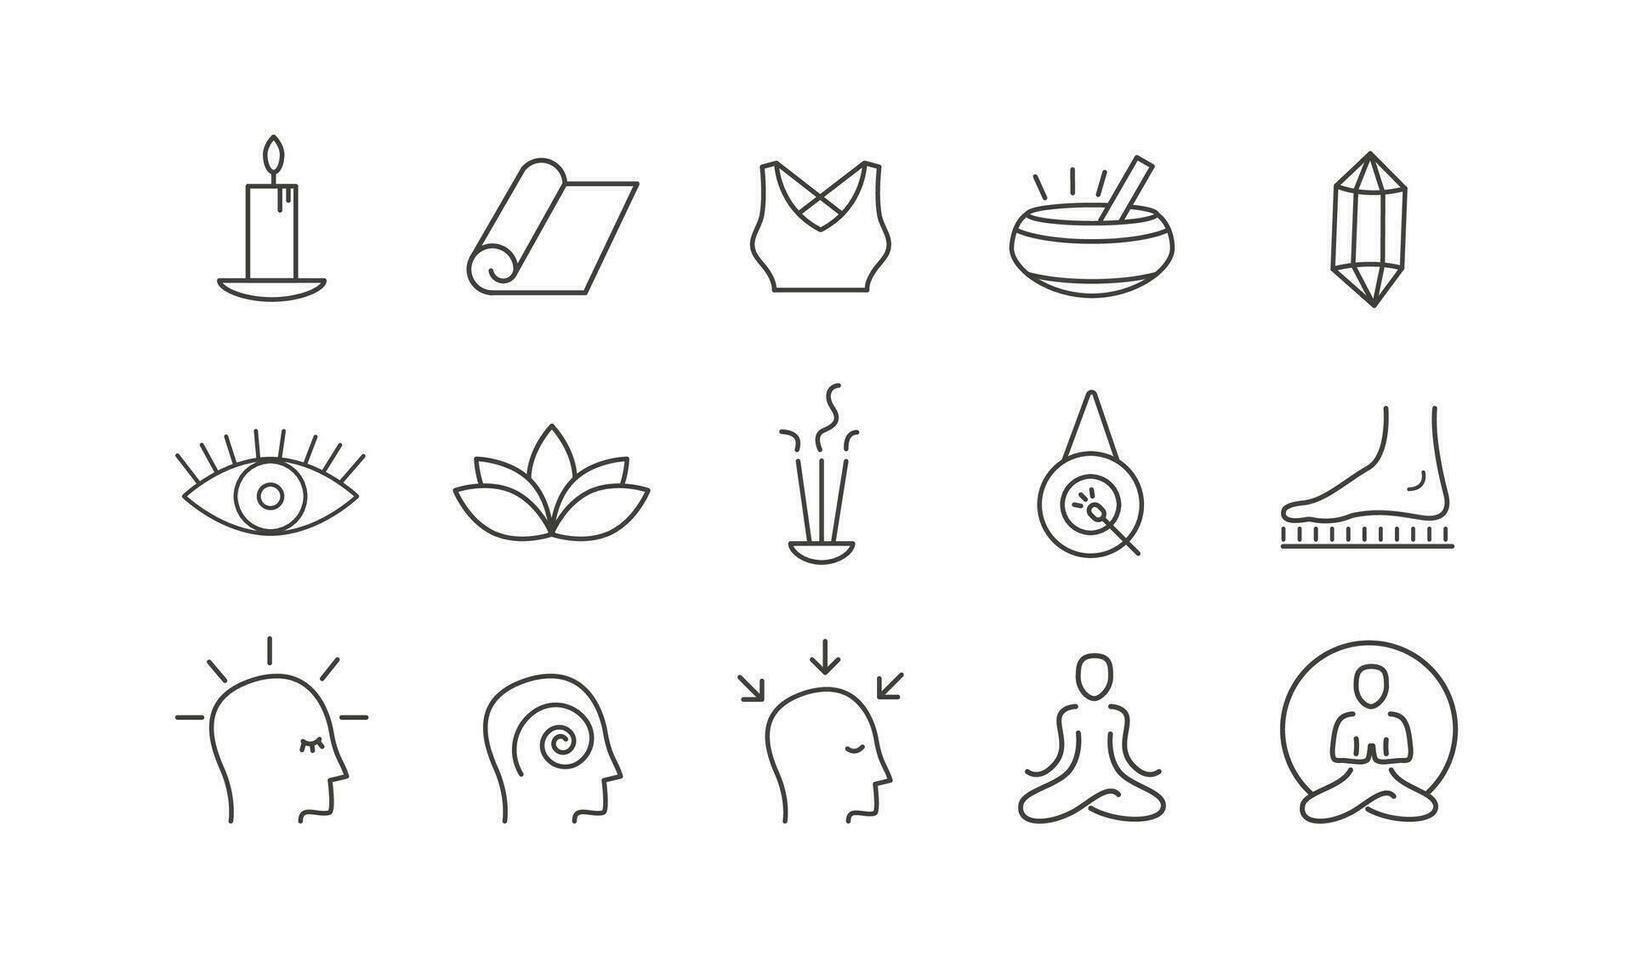 Yoga vector set. Outline icon collection for buddhist retreat, spiritual practice or Vipassana meditation. Sadhu board. Head with different mental state.